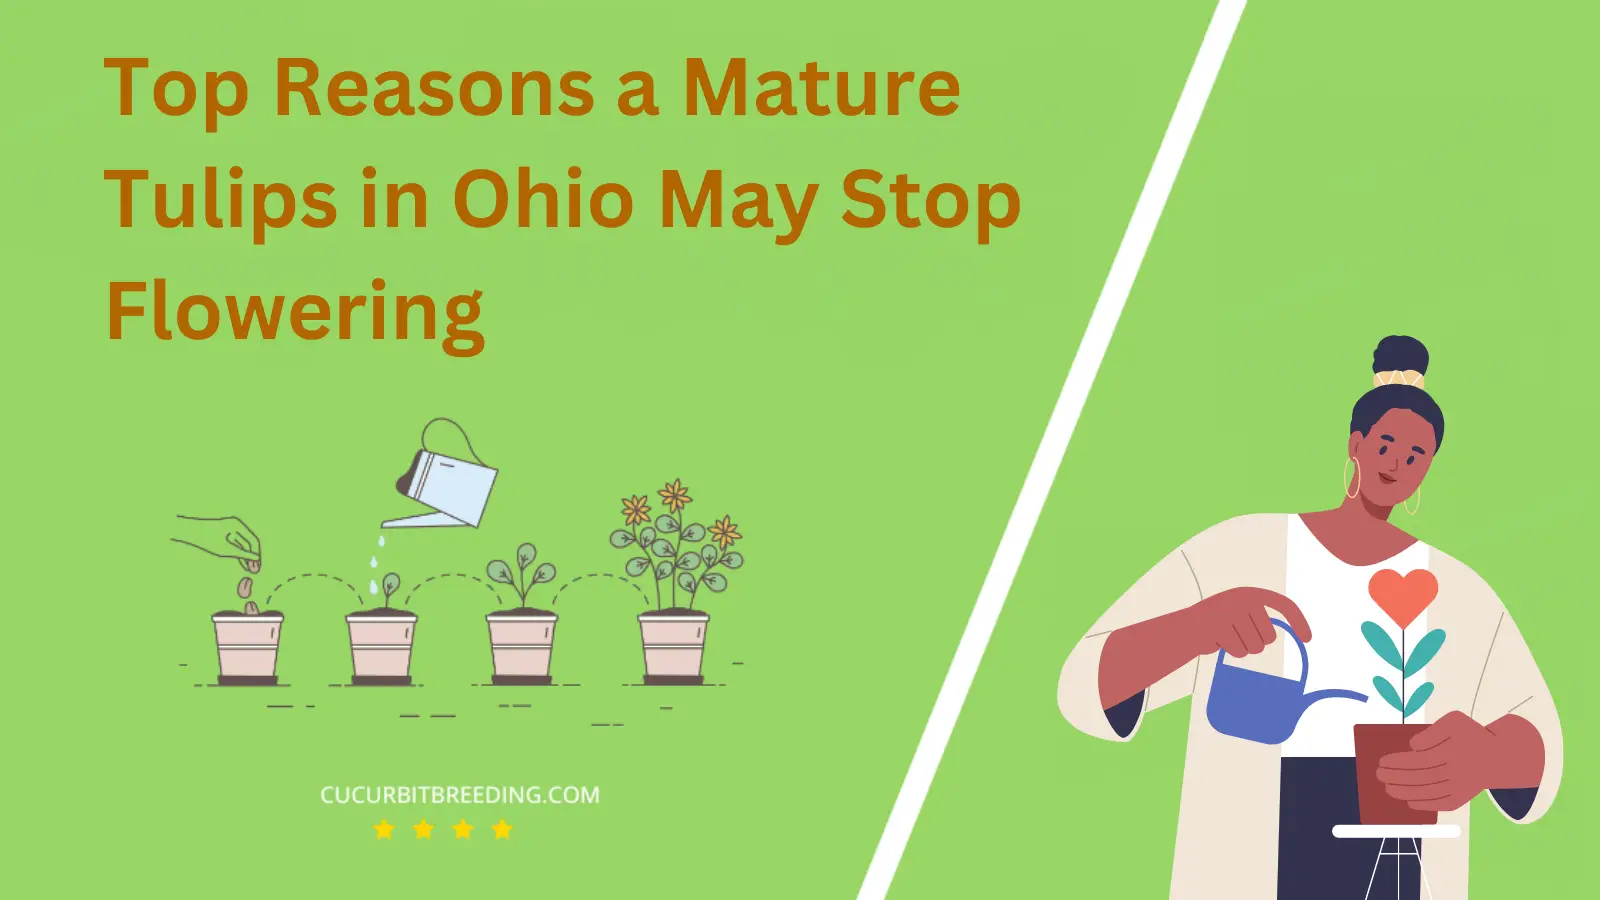 Top Reasons a Mature Tulips in Ohio May Stop Flowering